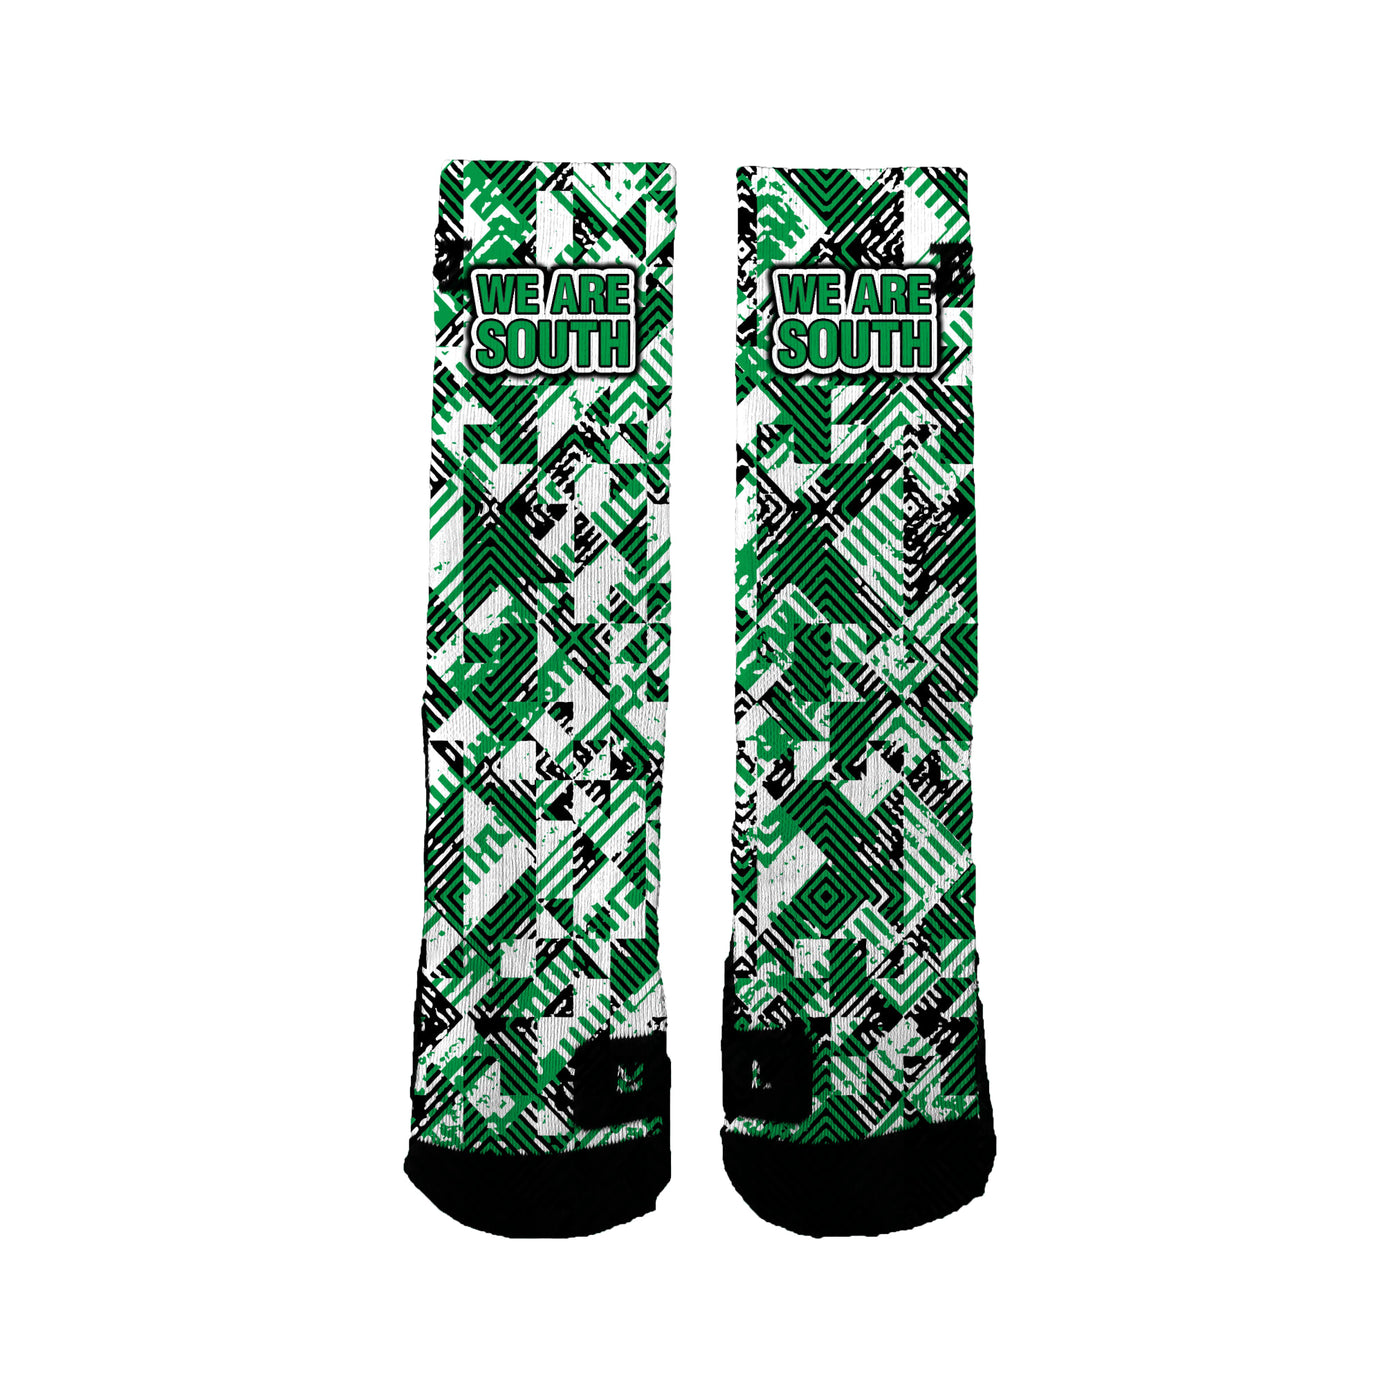 South Middle School Grooves Socks